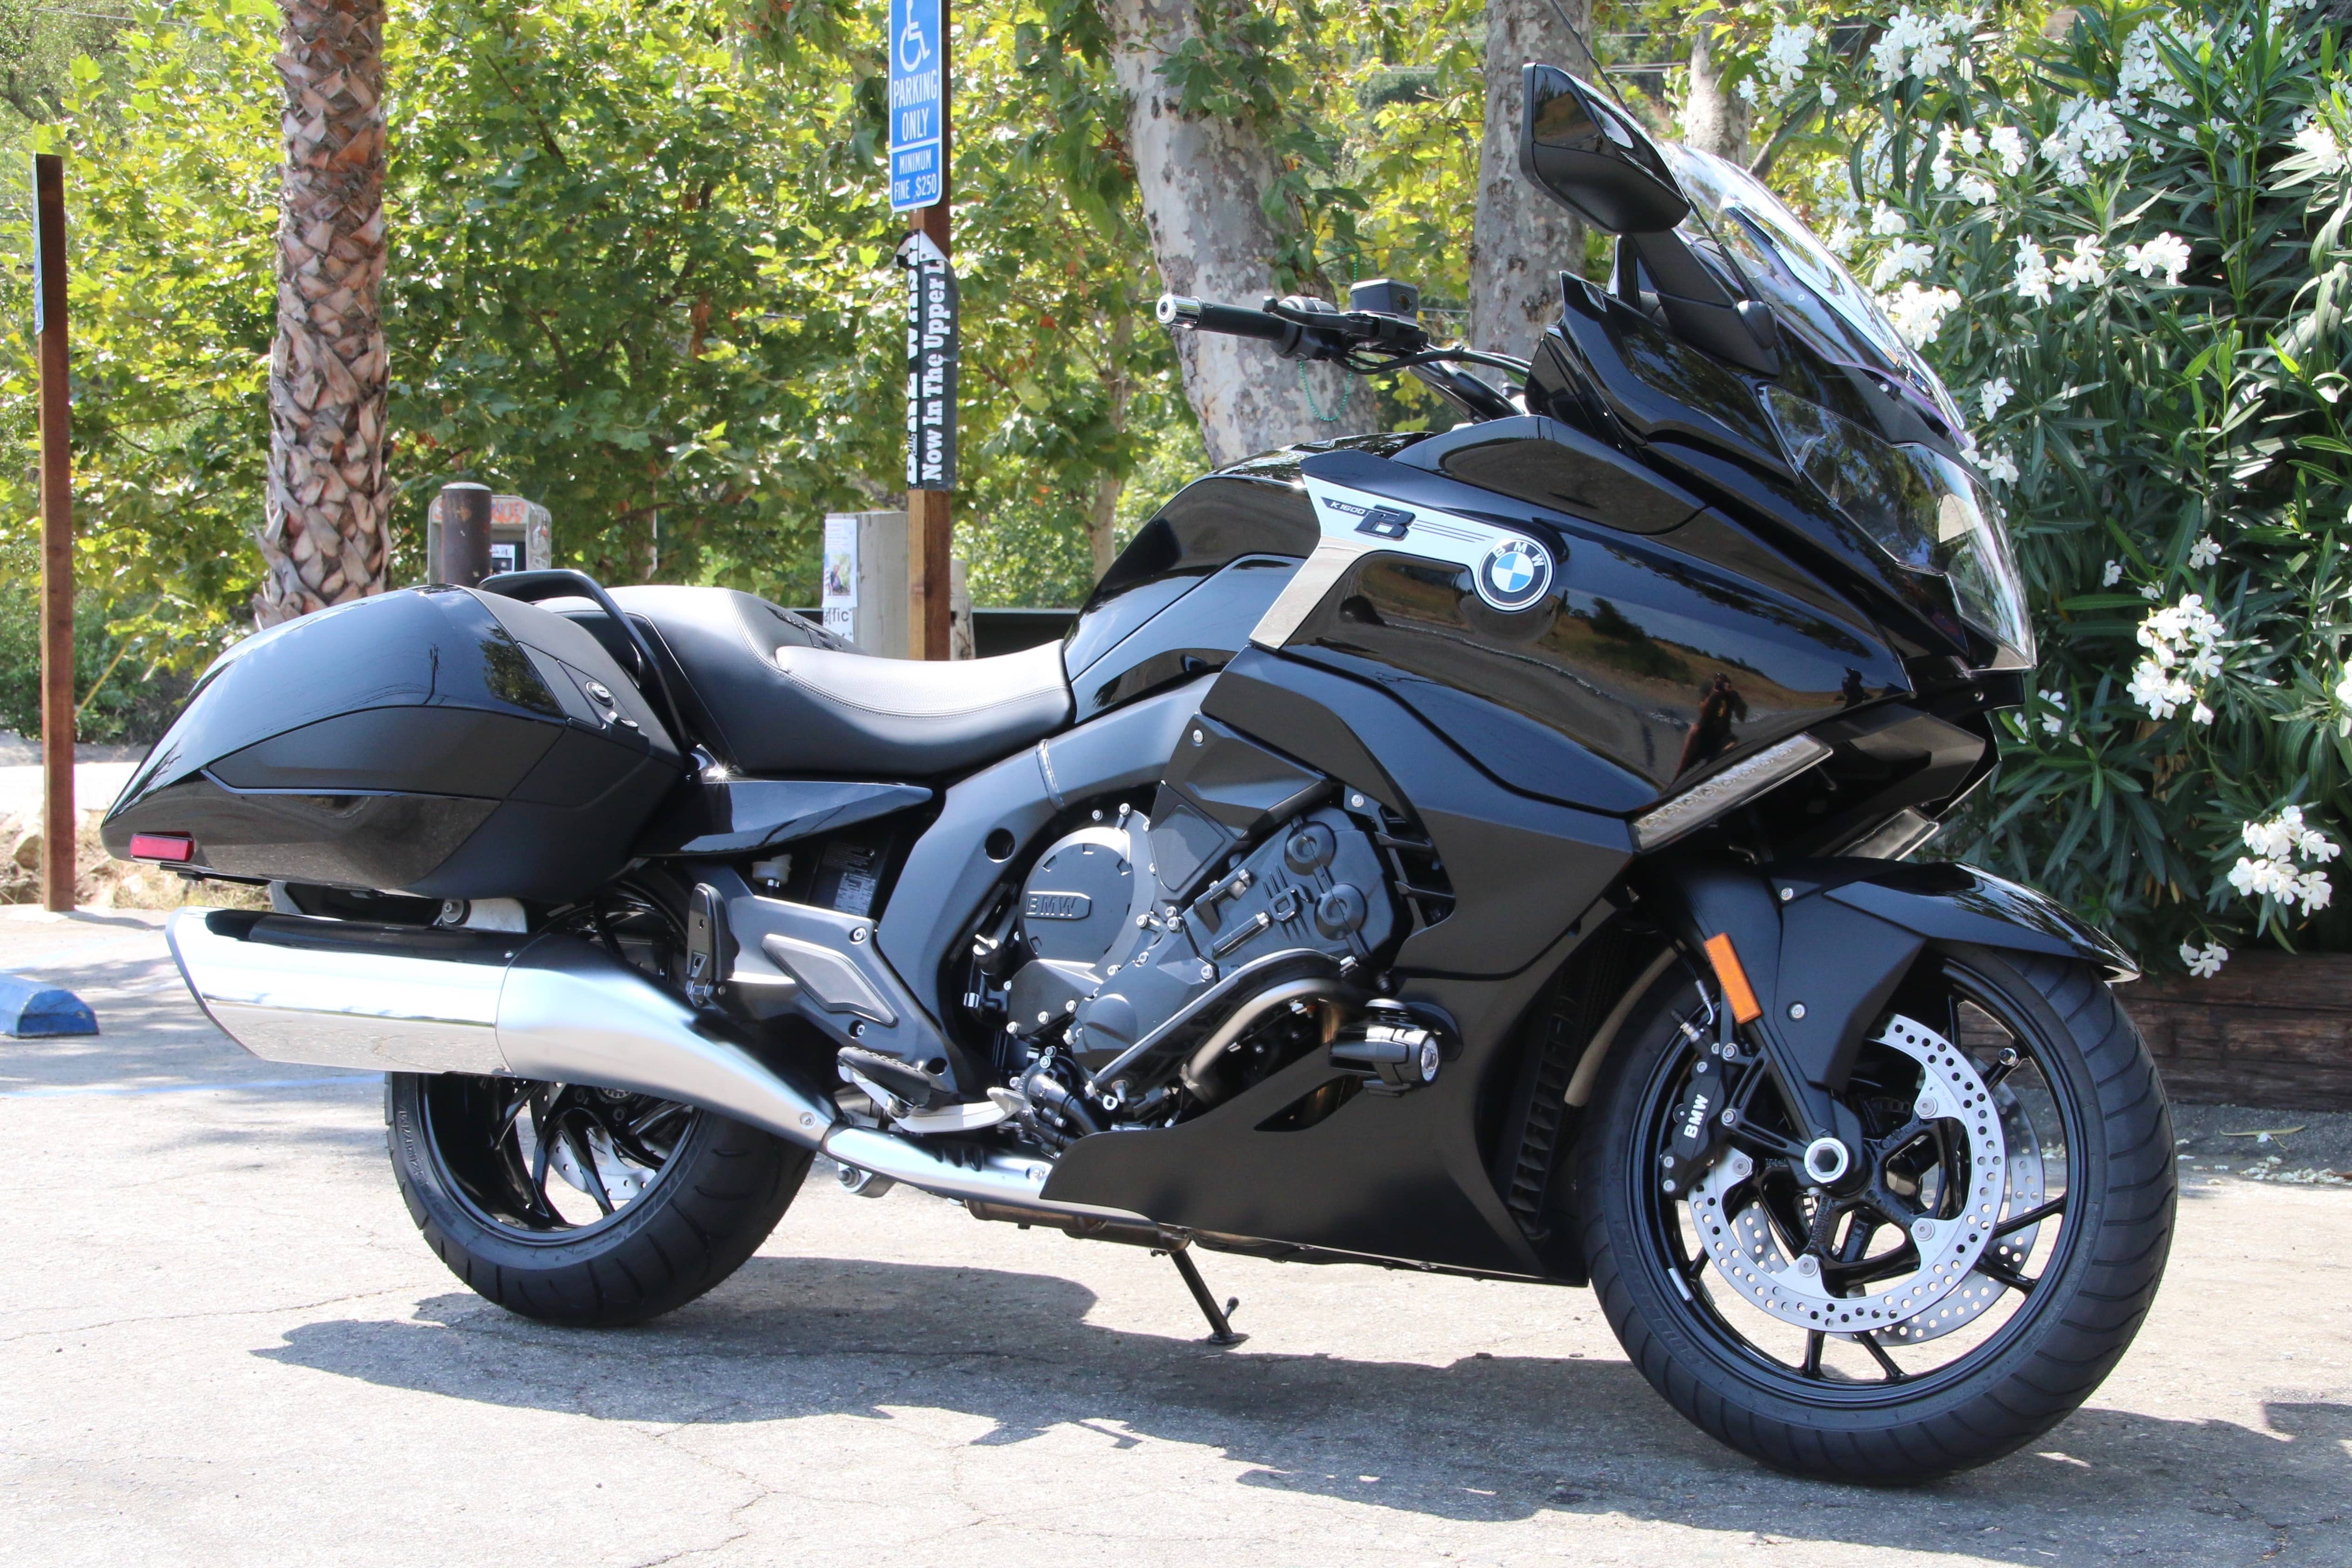 Bmw Motorcycle Burbank Ca : 2008 BMW K 1200 Gt For Sale in Burbank, OH